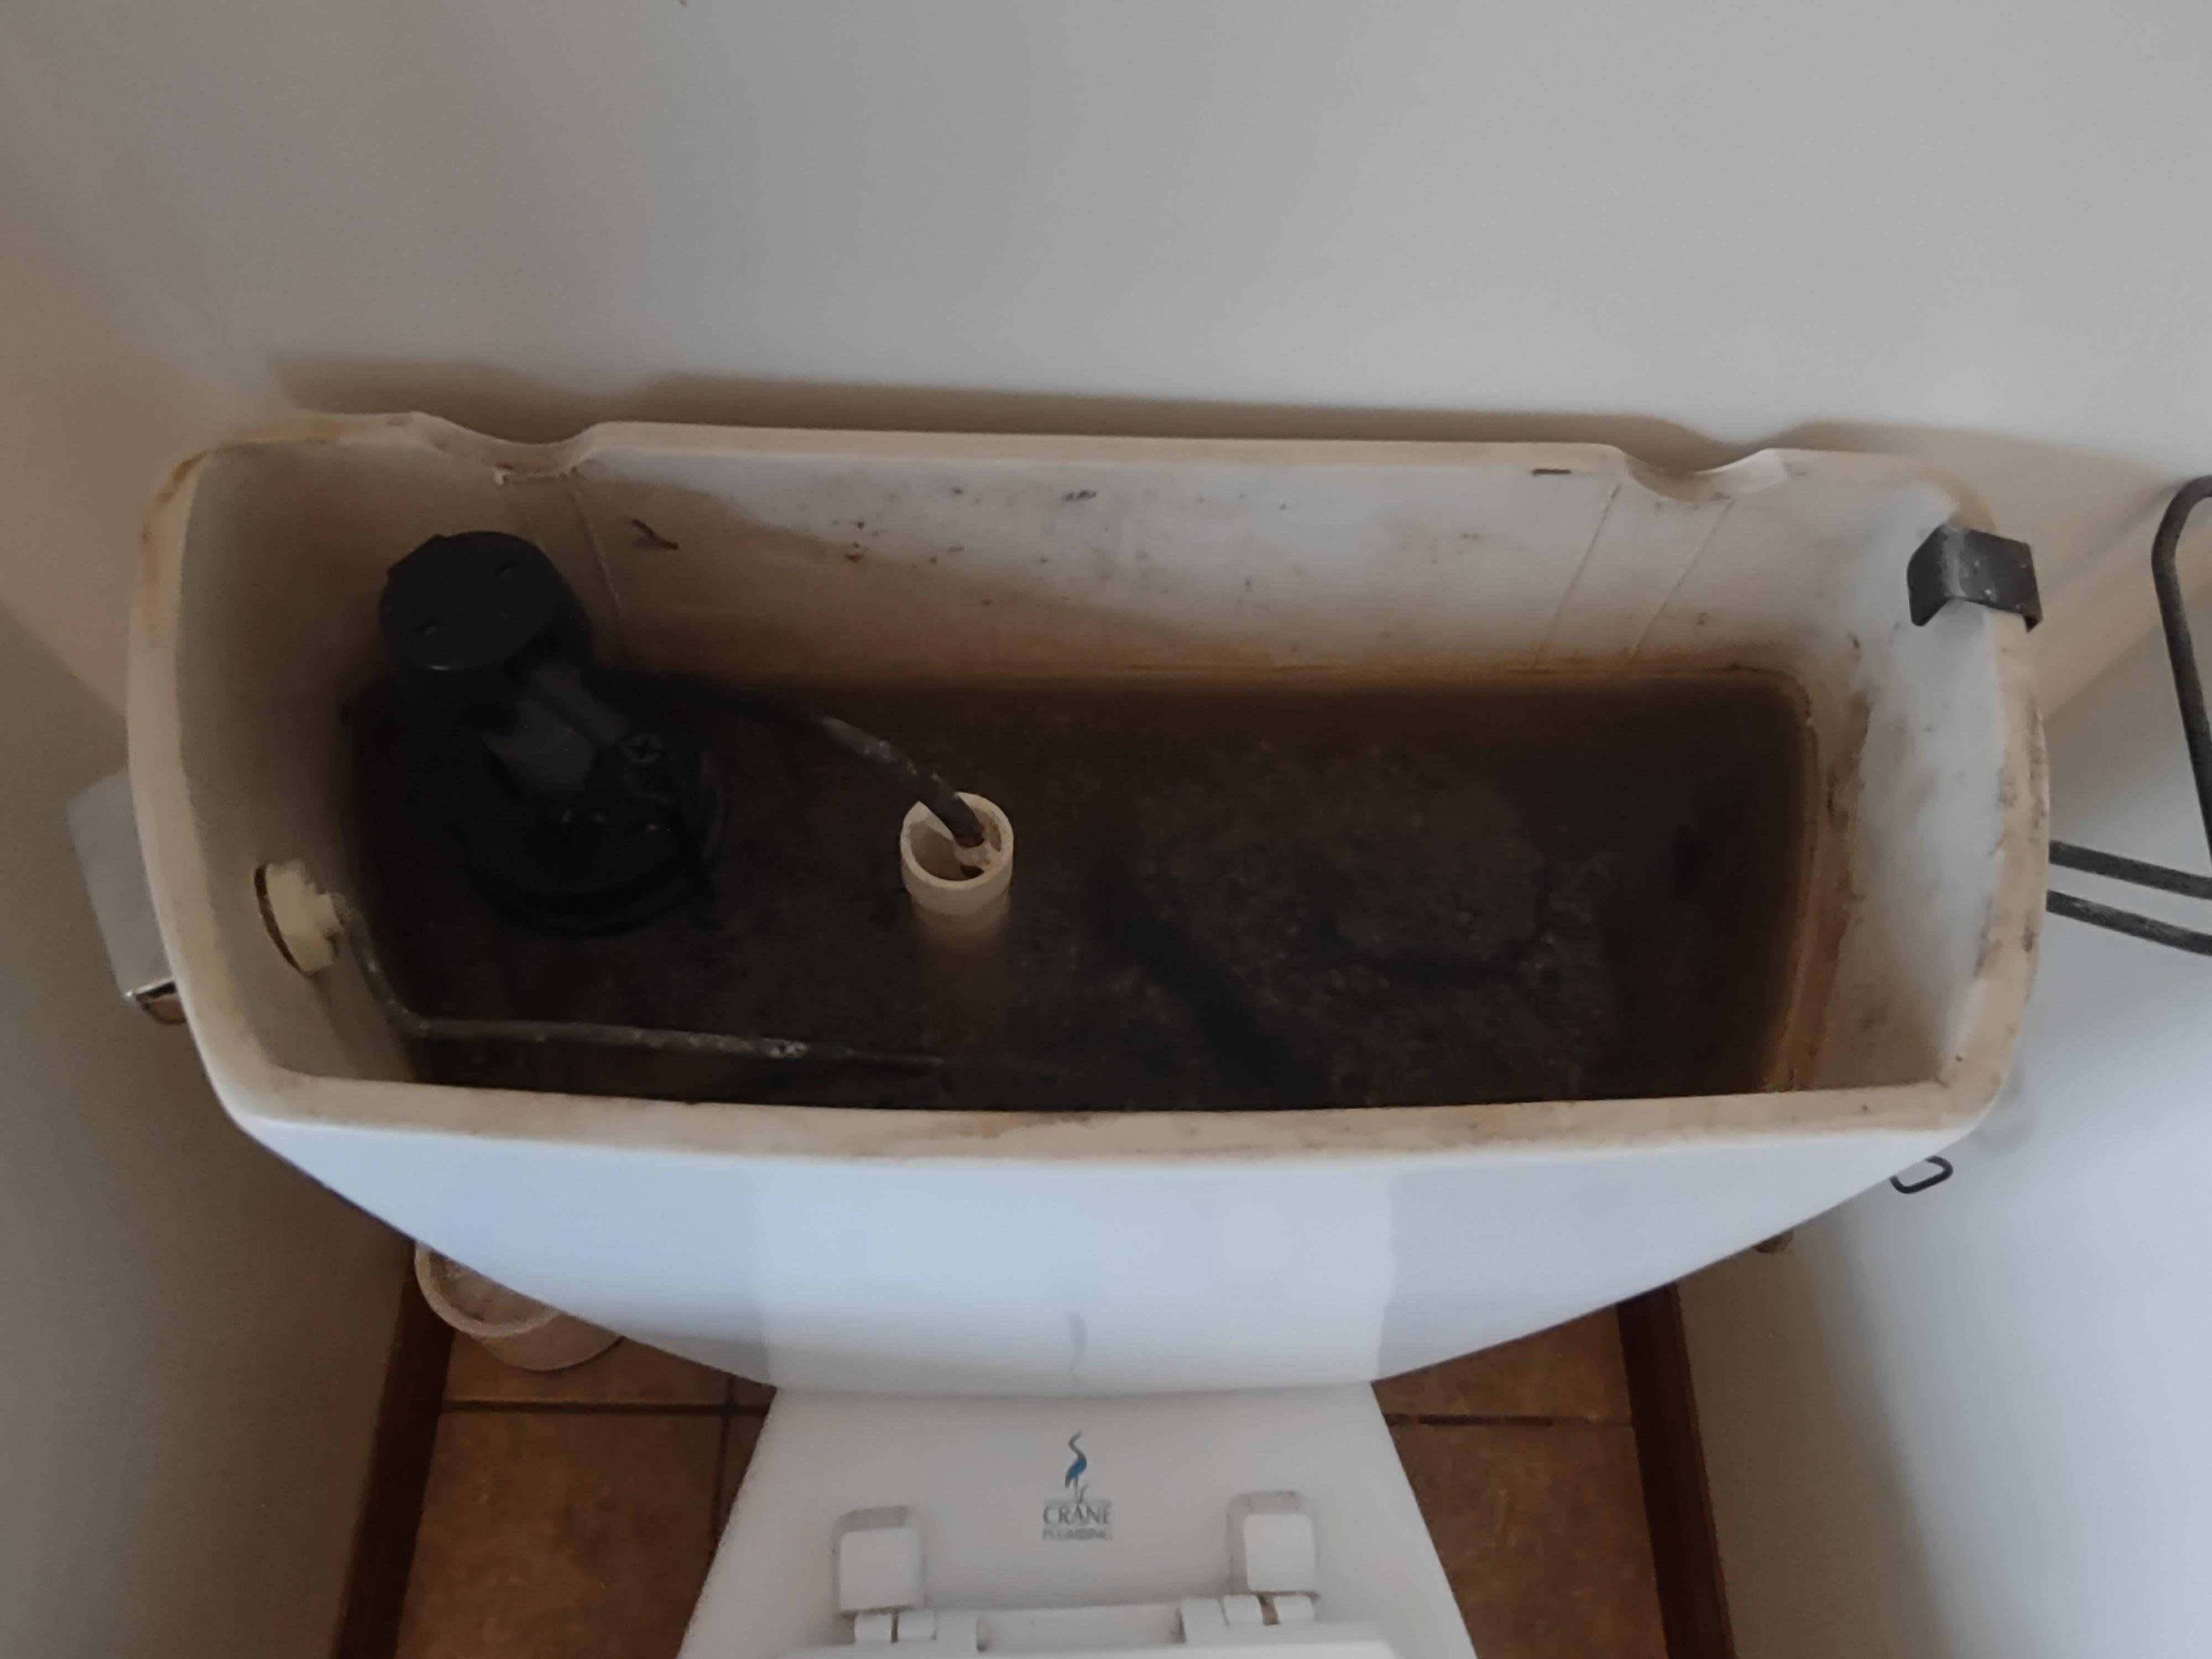 Fix a Toilet Tank: Loose Handle, Discolored Water, and High Water Level.